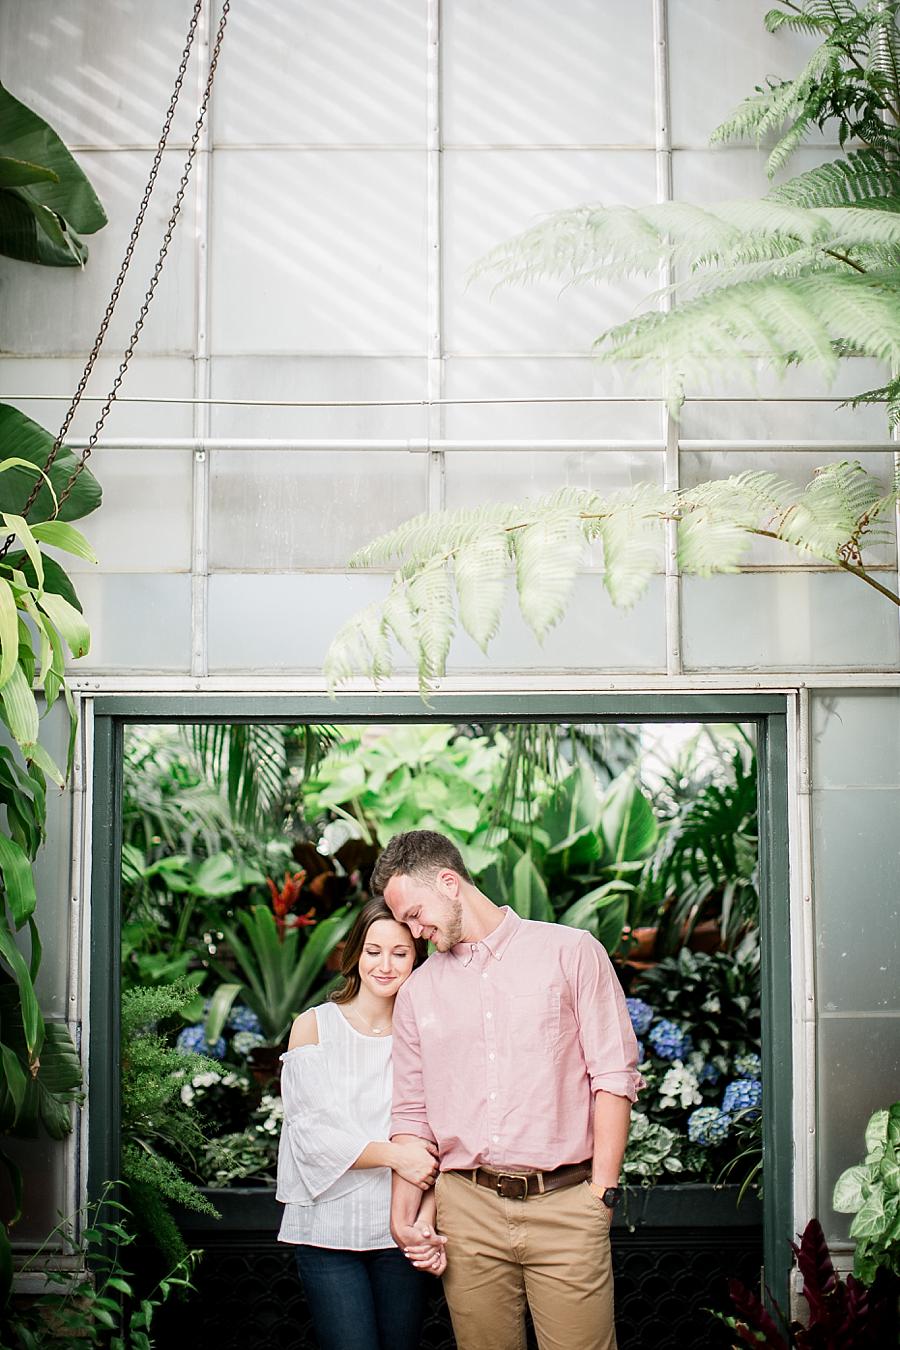 Conservatory doorway at this Biltmore Engagement by Knoxville Wedding Photographer, Amanda May Photos.